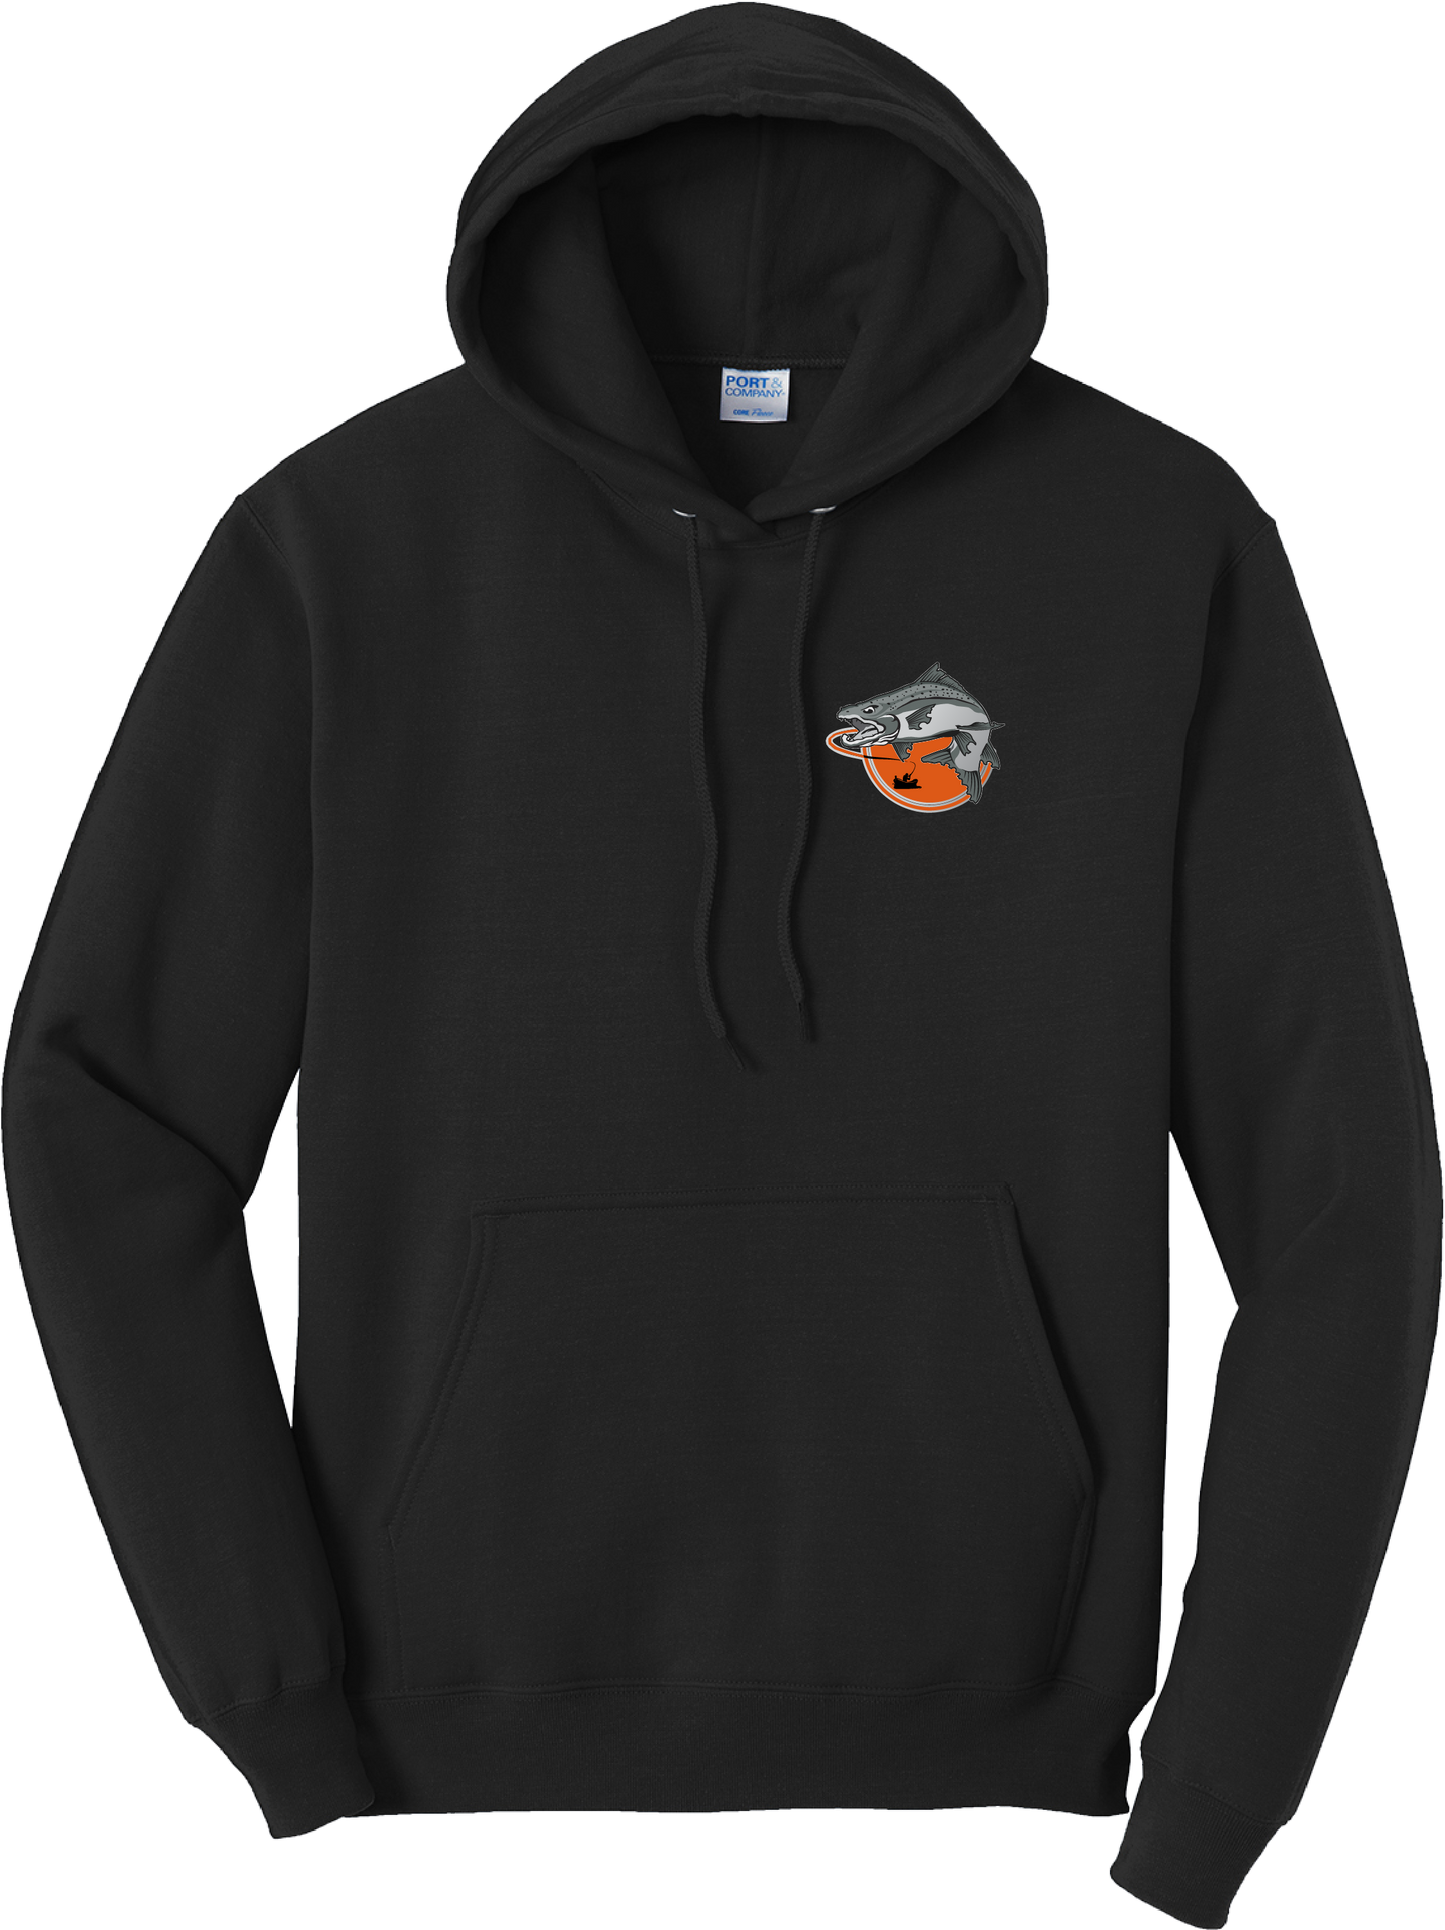 J. Taylor Guide Services - Hoodie